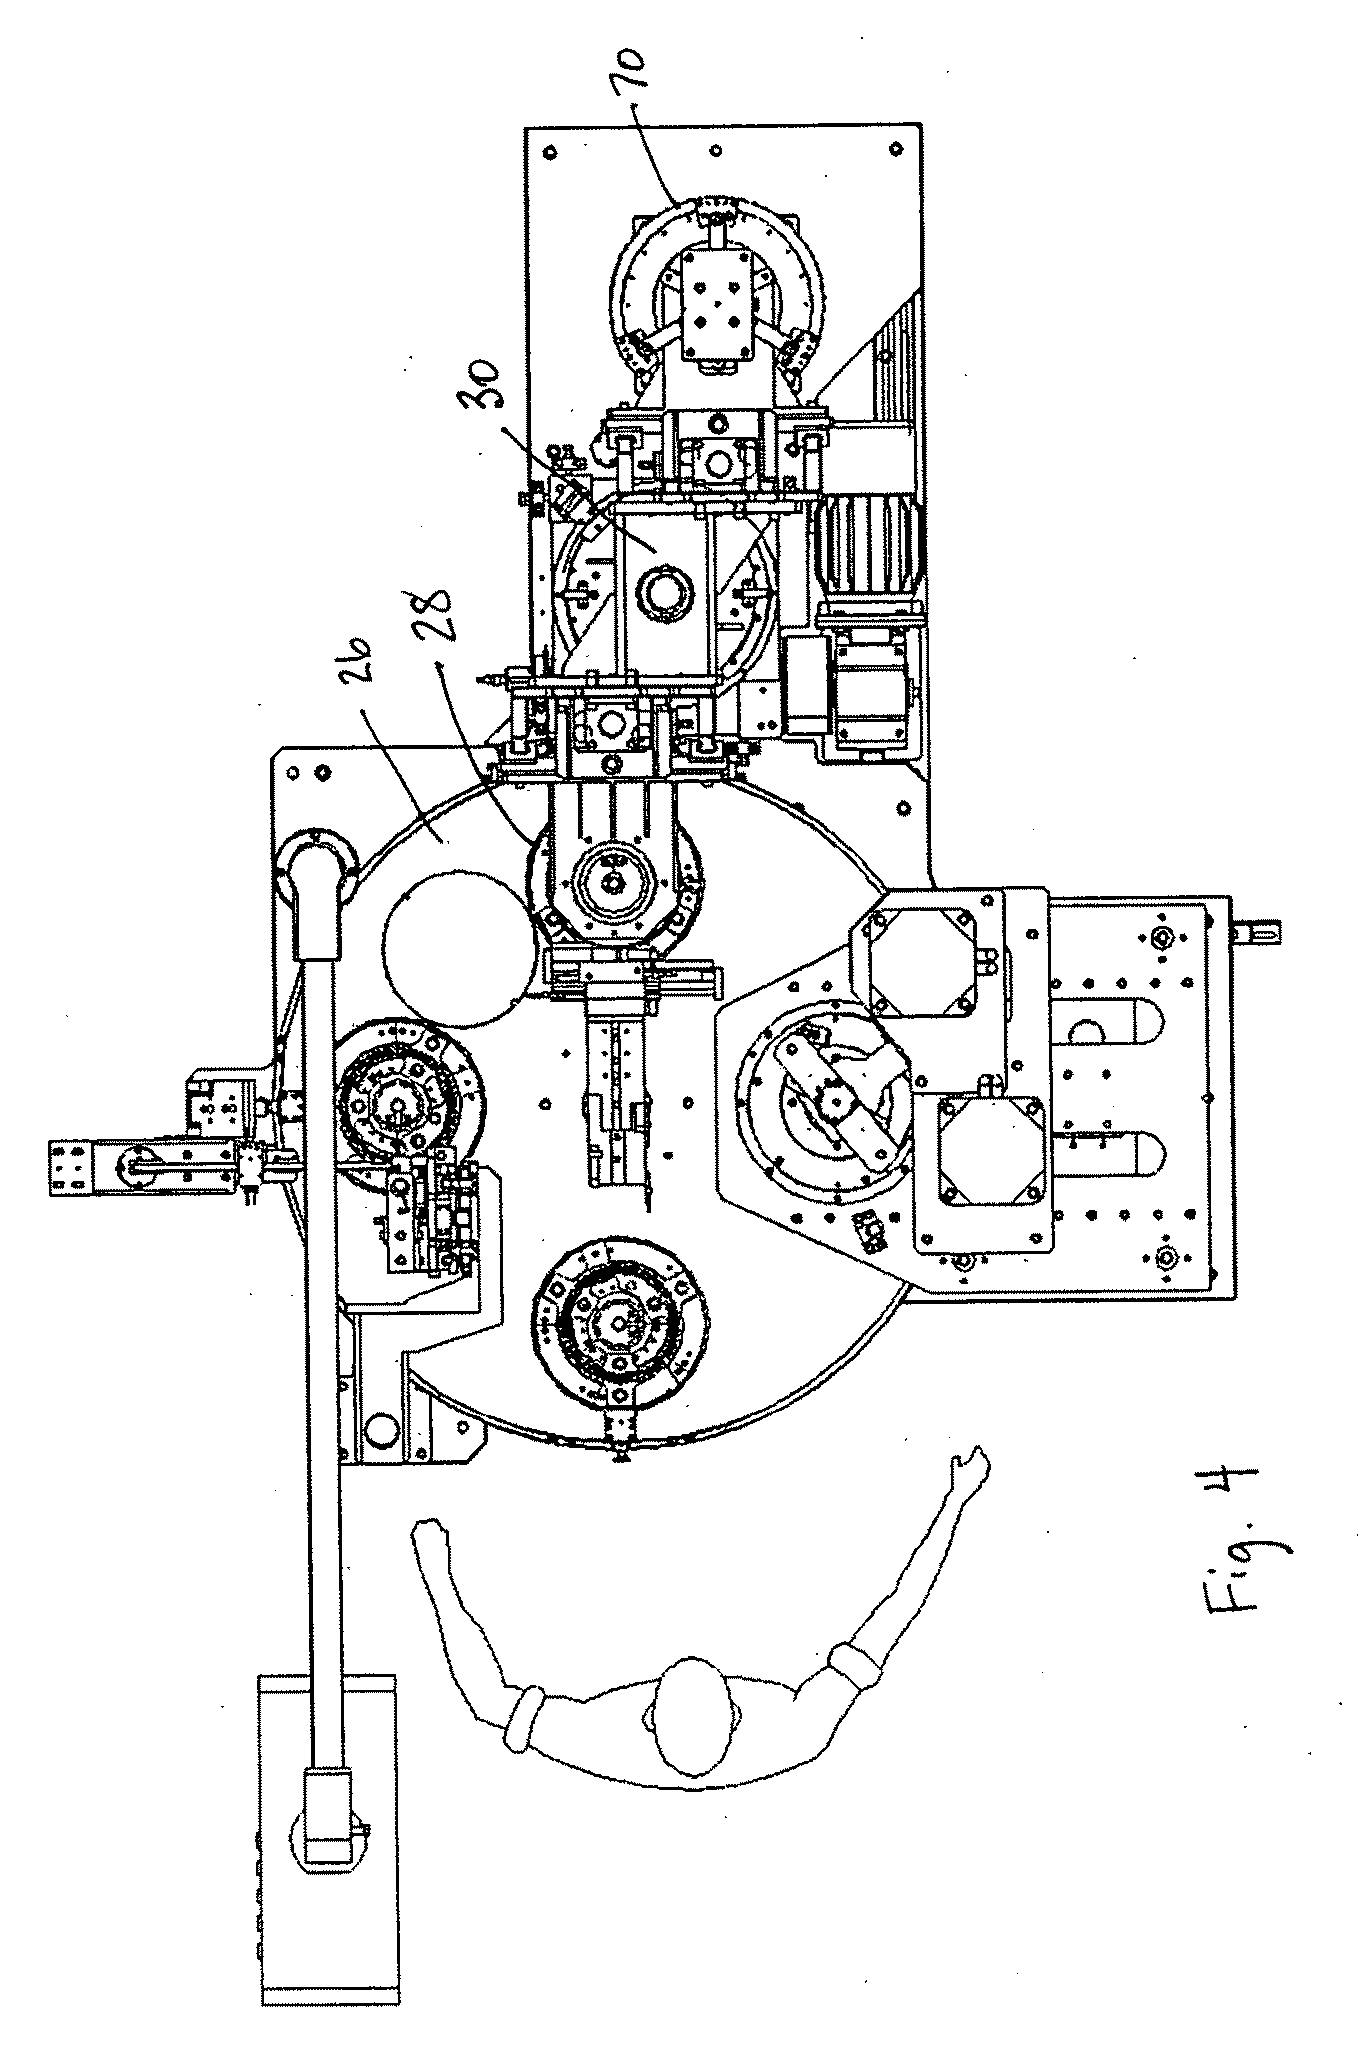 Method and apparatus for removing winding conductors from a twisting machine and placing them in a rotor or stator stack